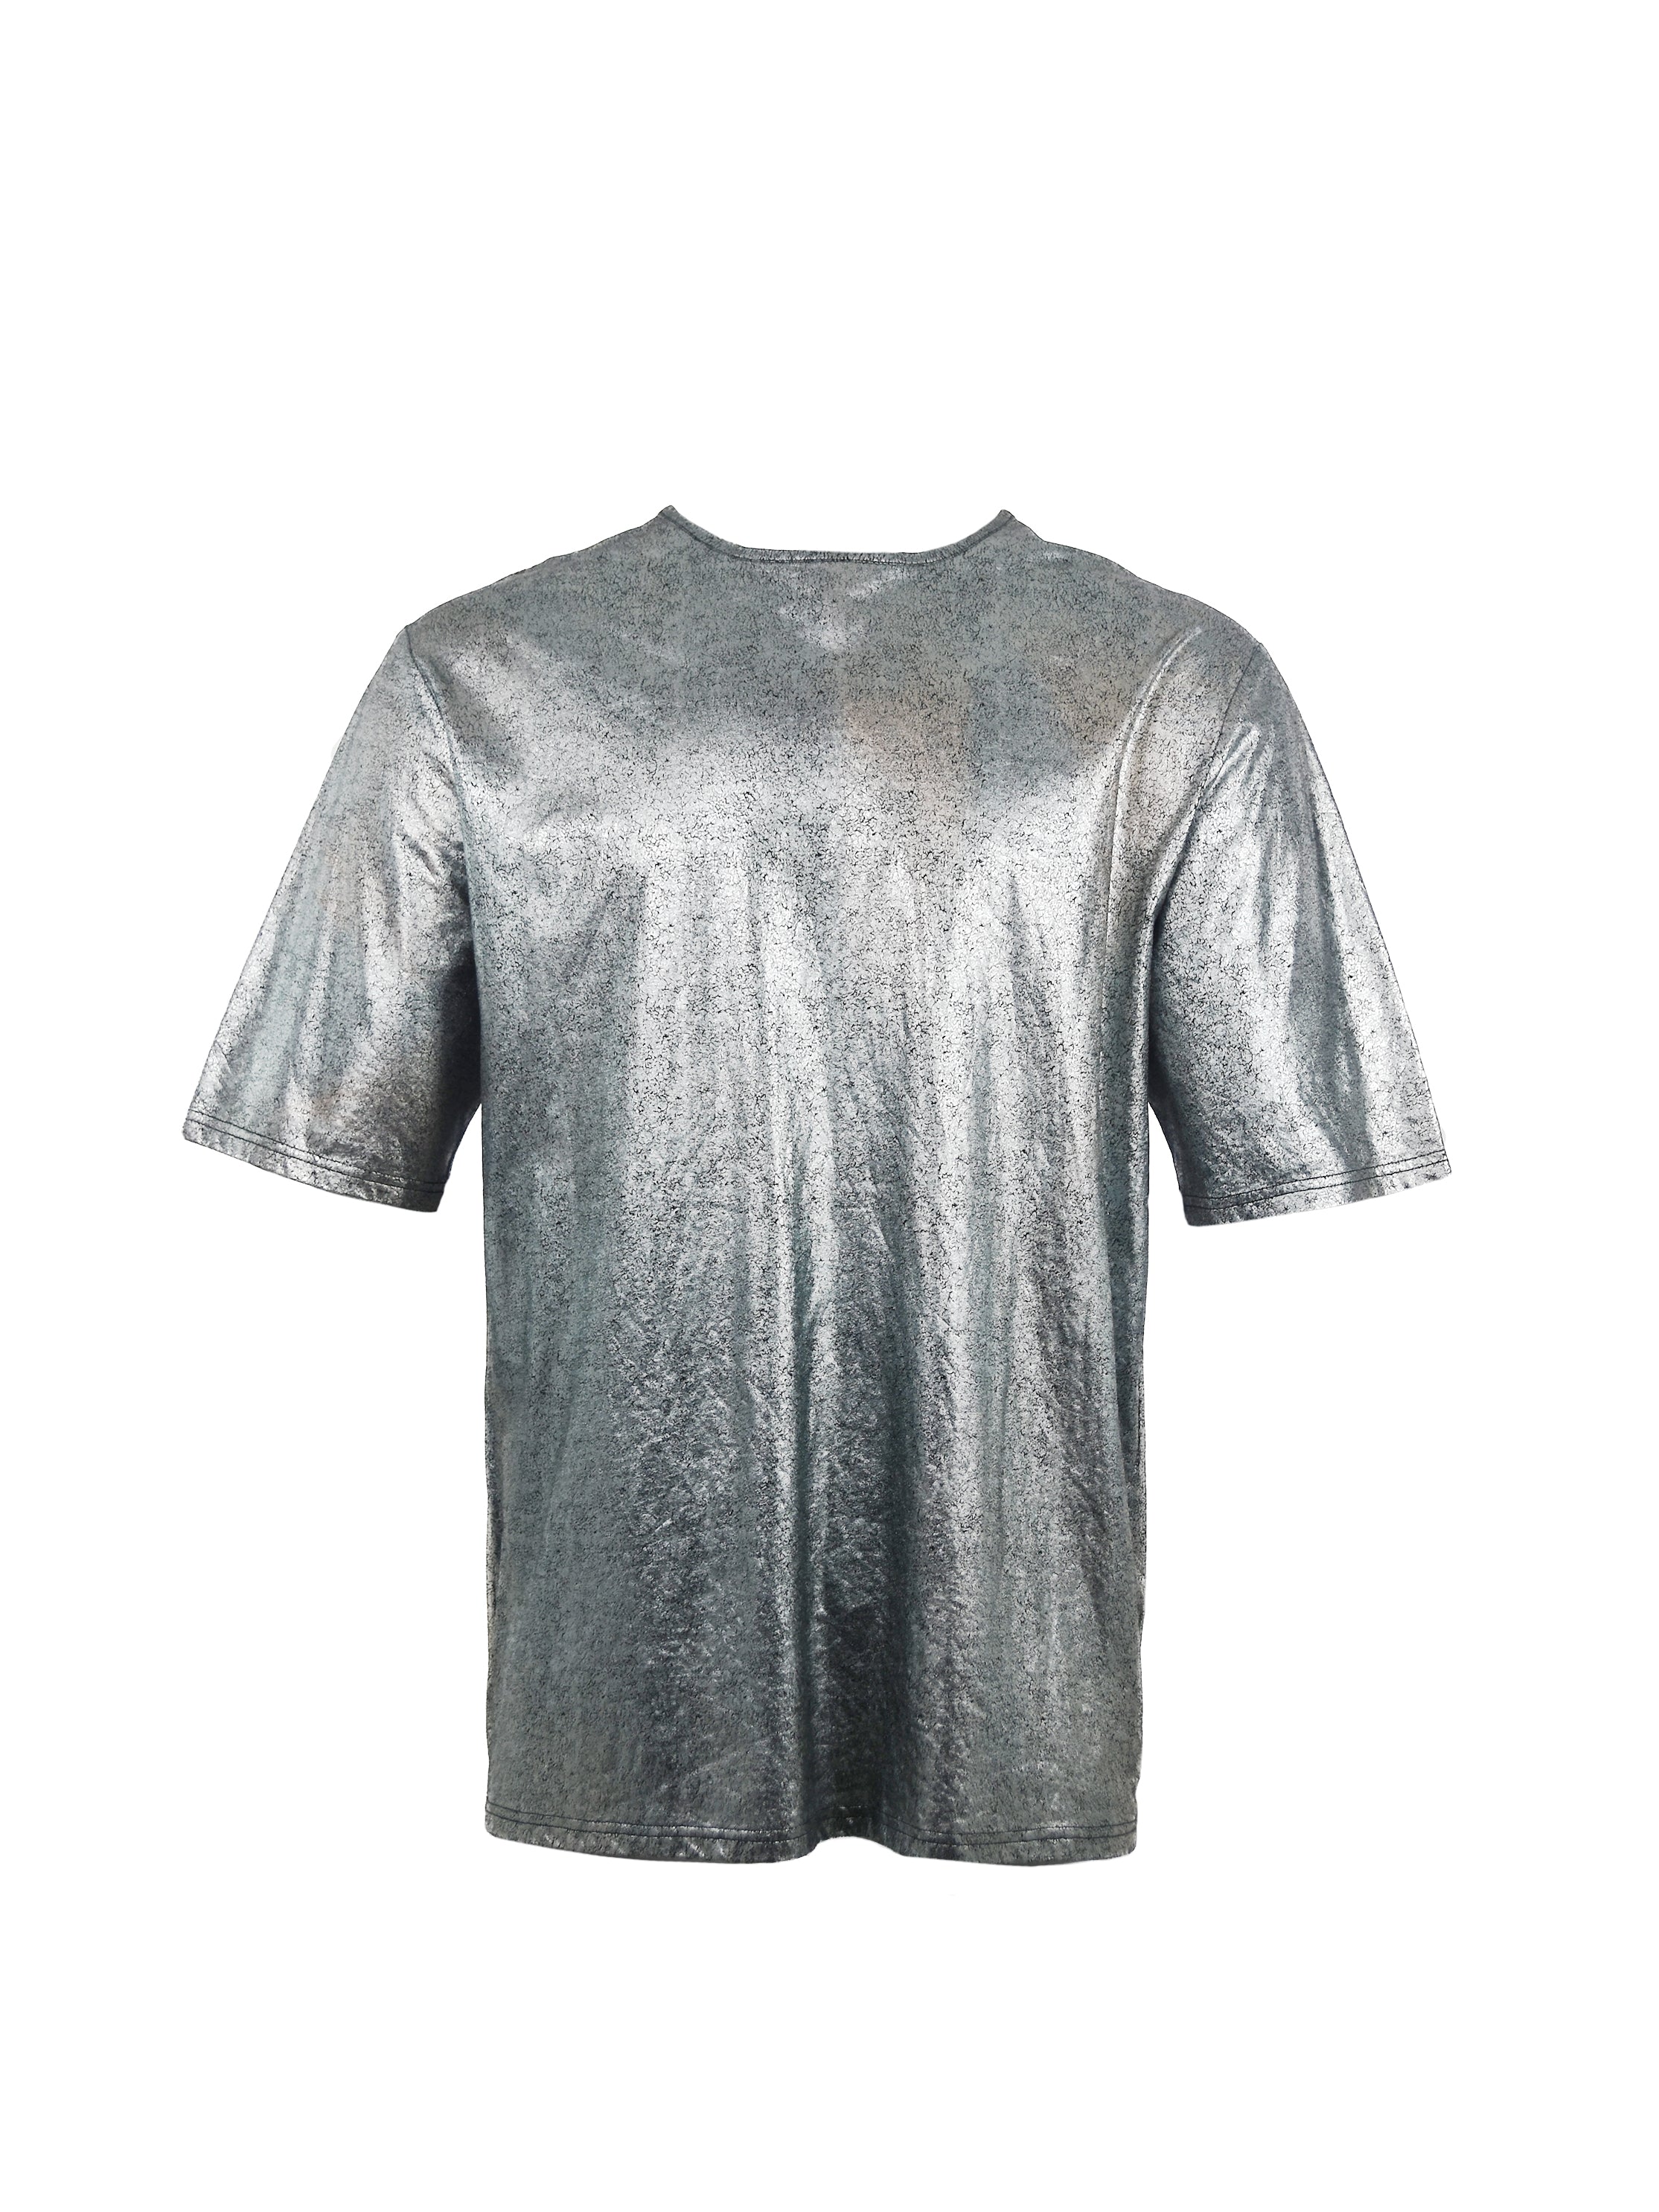 SILVER FOILED OVERSIZED JERSEY T-SHIRT